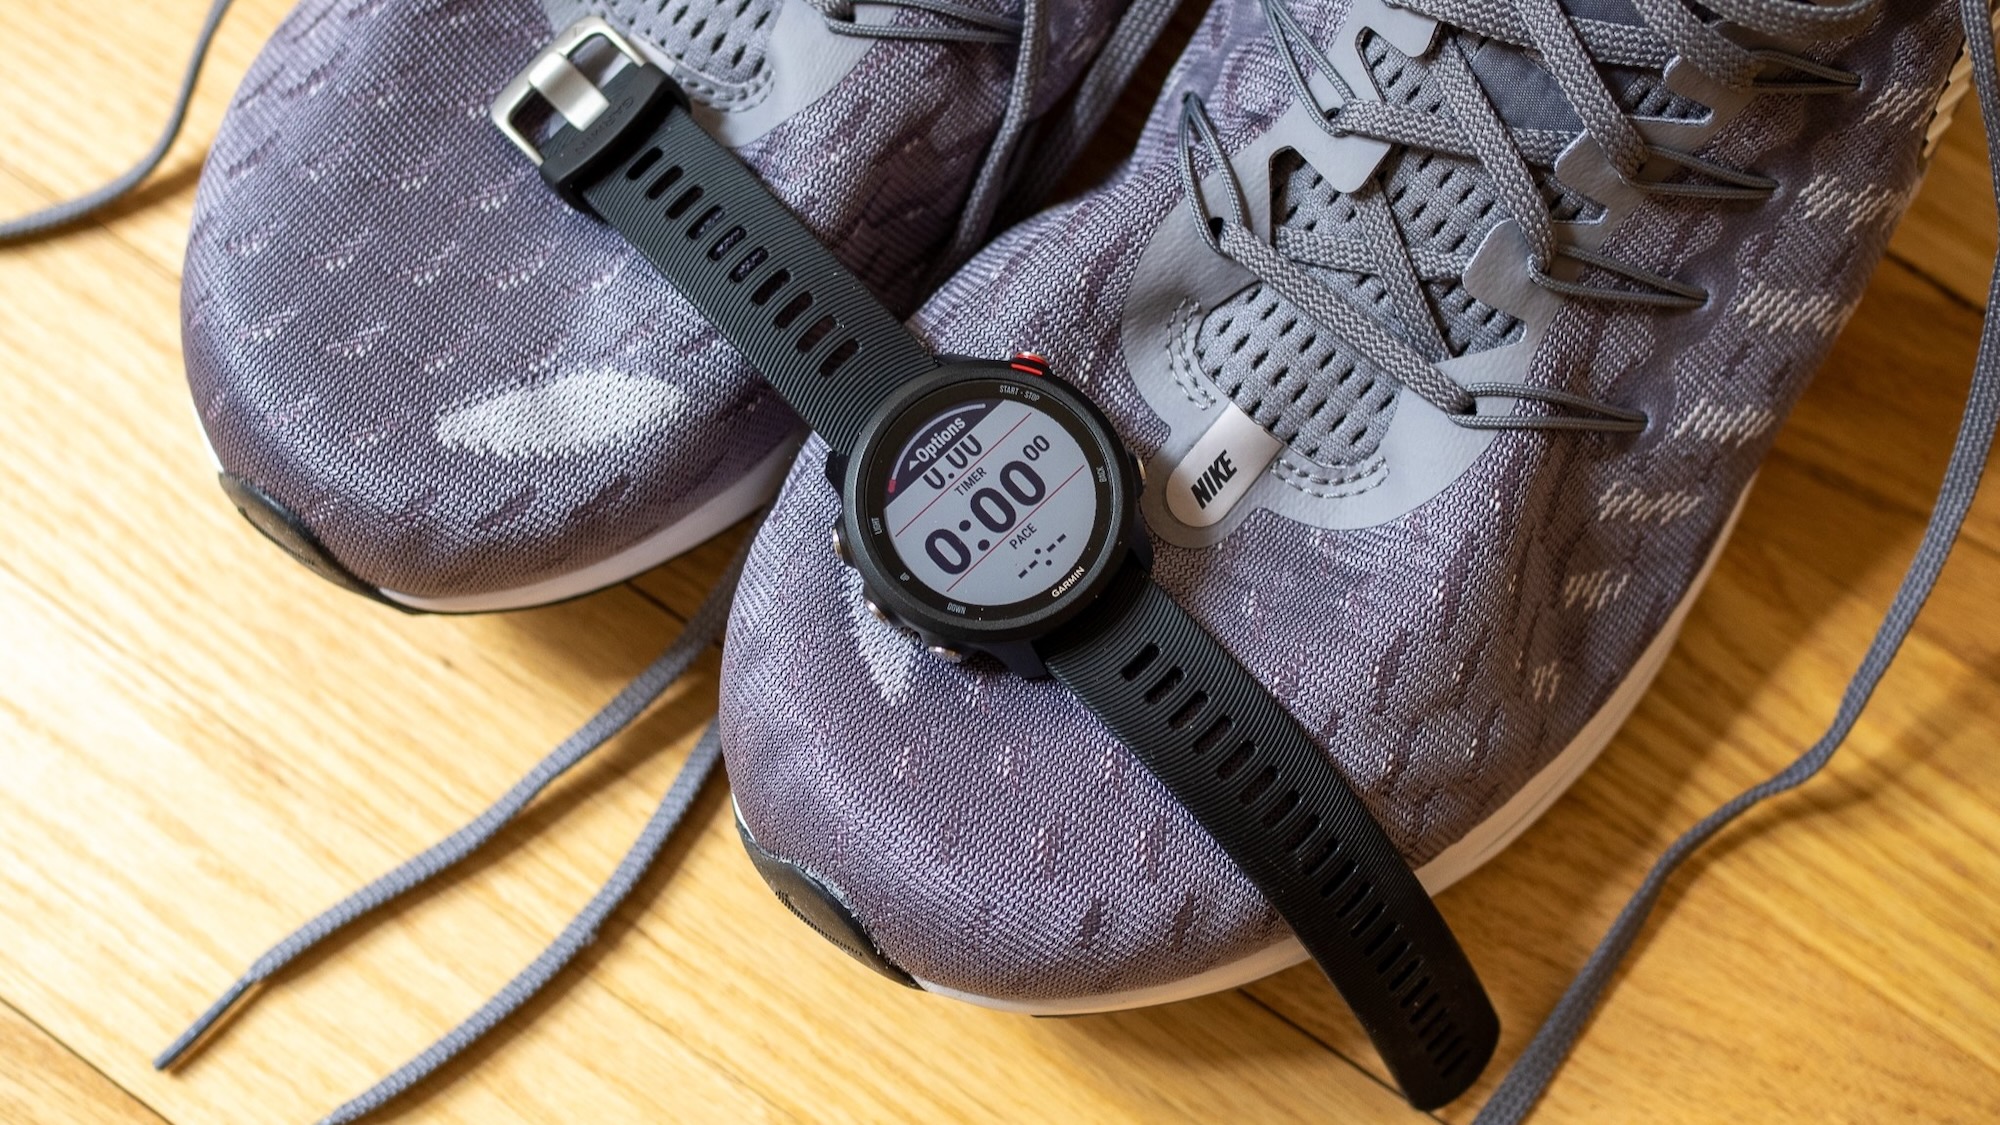 Garmin Forerunner 245 sitting on top of shoes